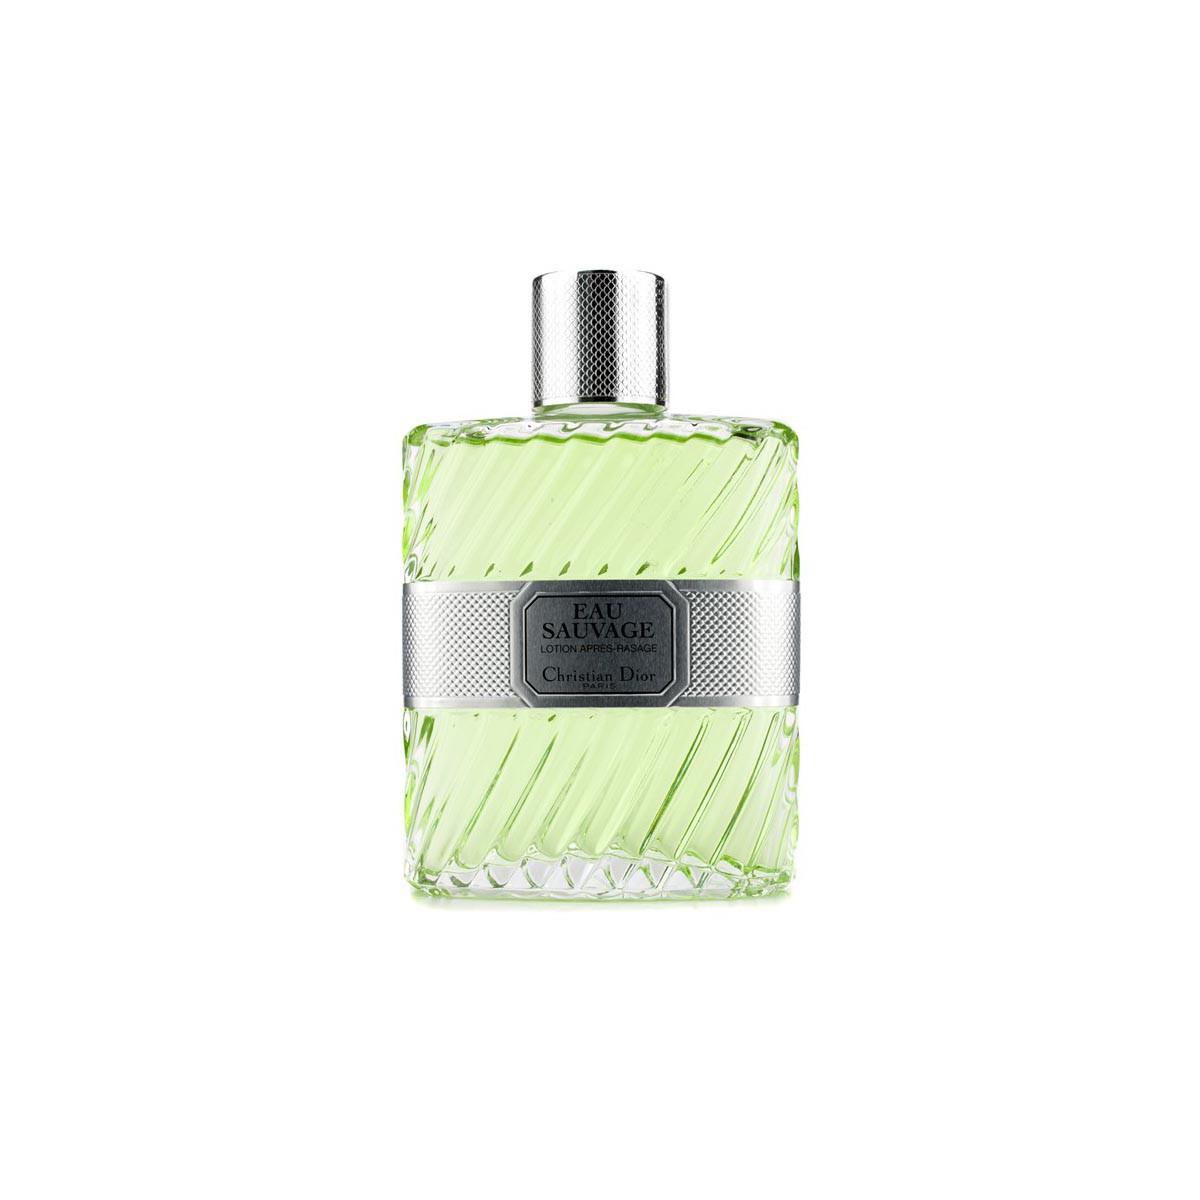 dior-lozione-eau-sauvage-after-shave-200ml